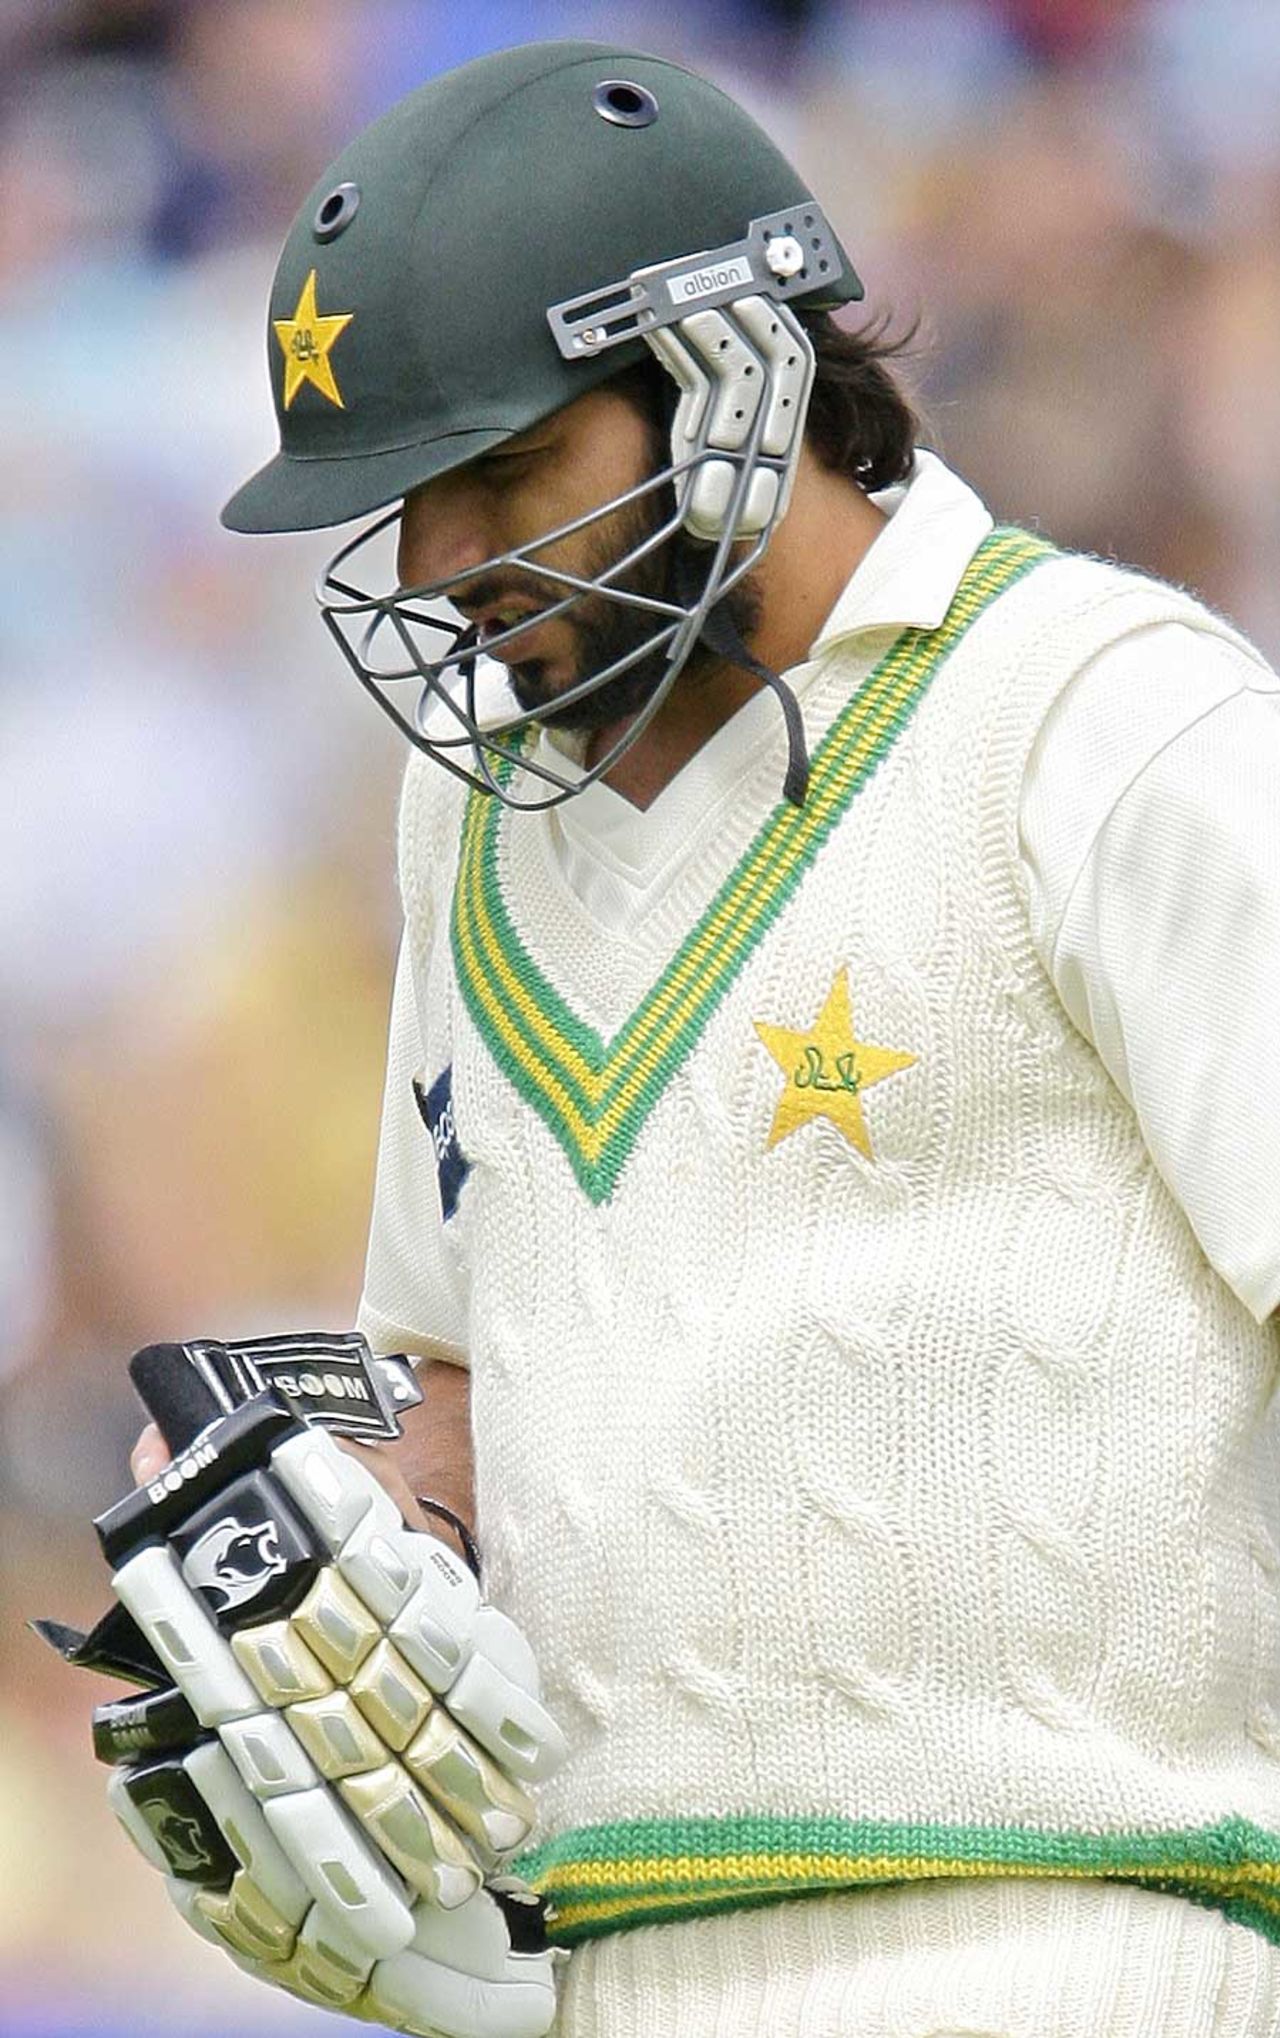 Shahid Afridi announced he was quitting Test cricket after Pakistan's defeat, Pakistan v Australia, 1st Test, Lord's, July 16, 2010